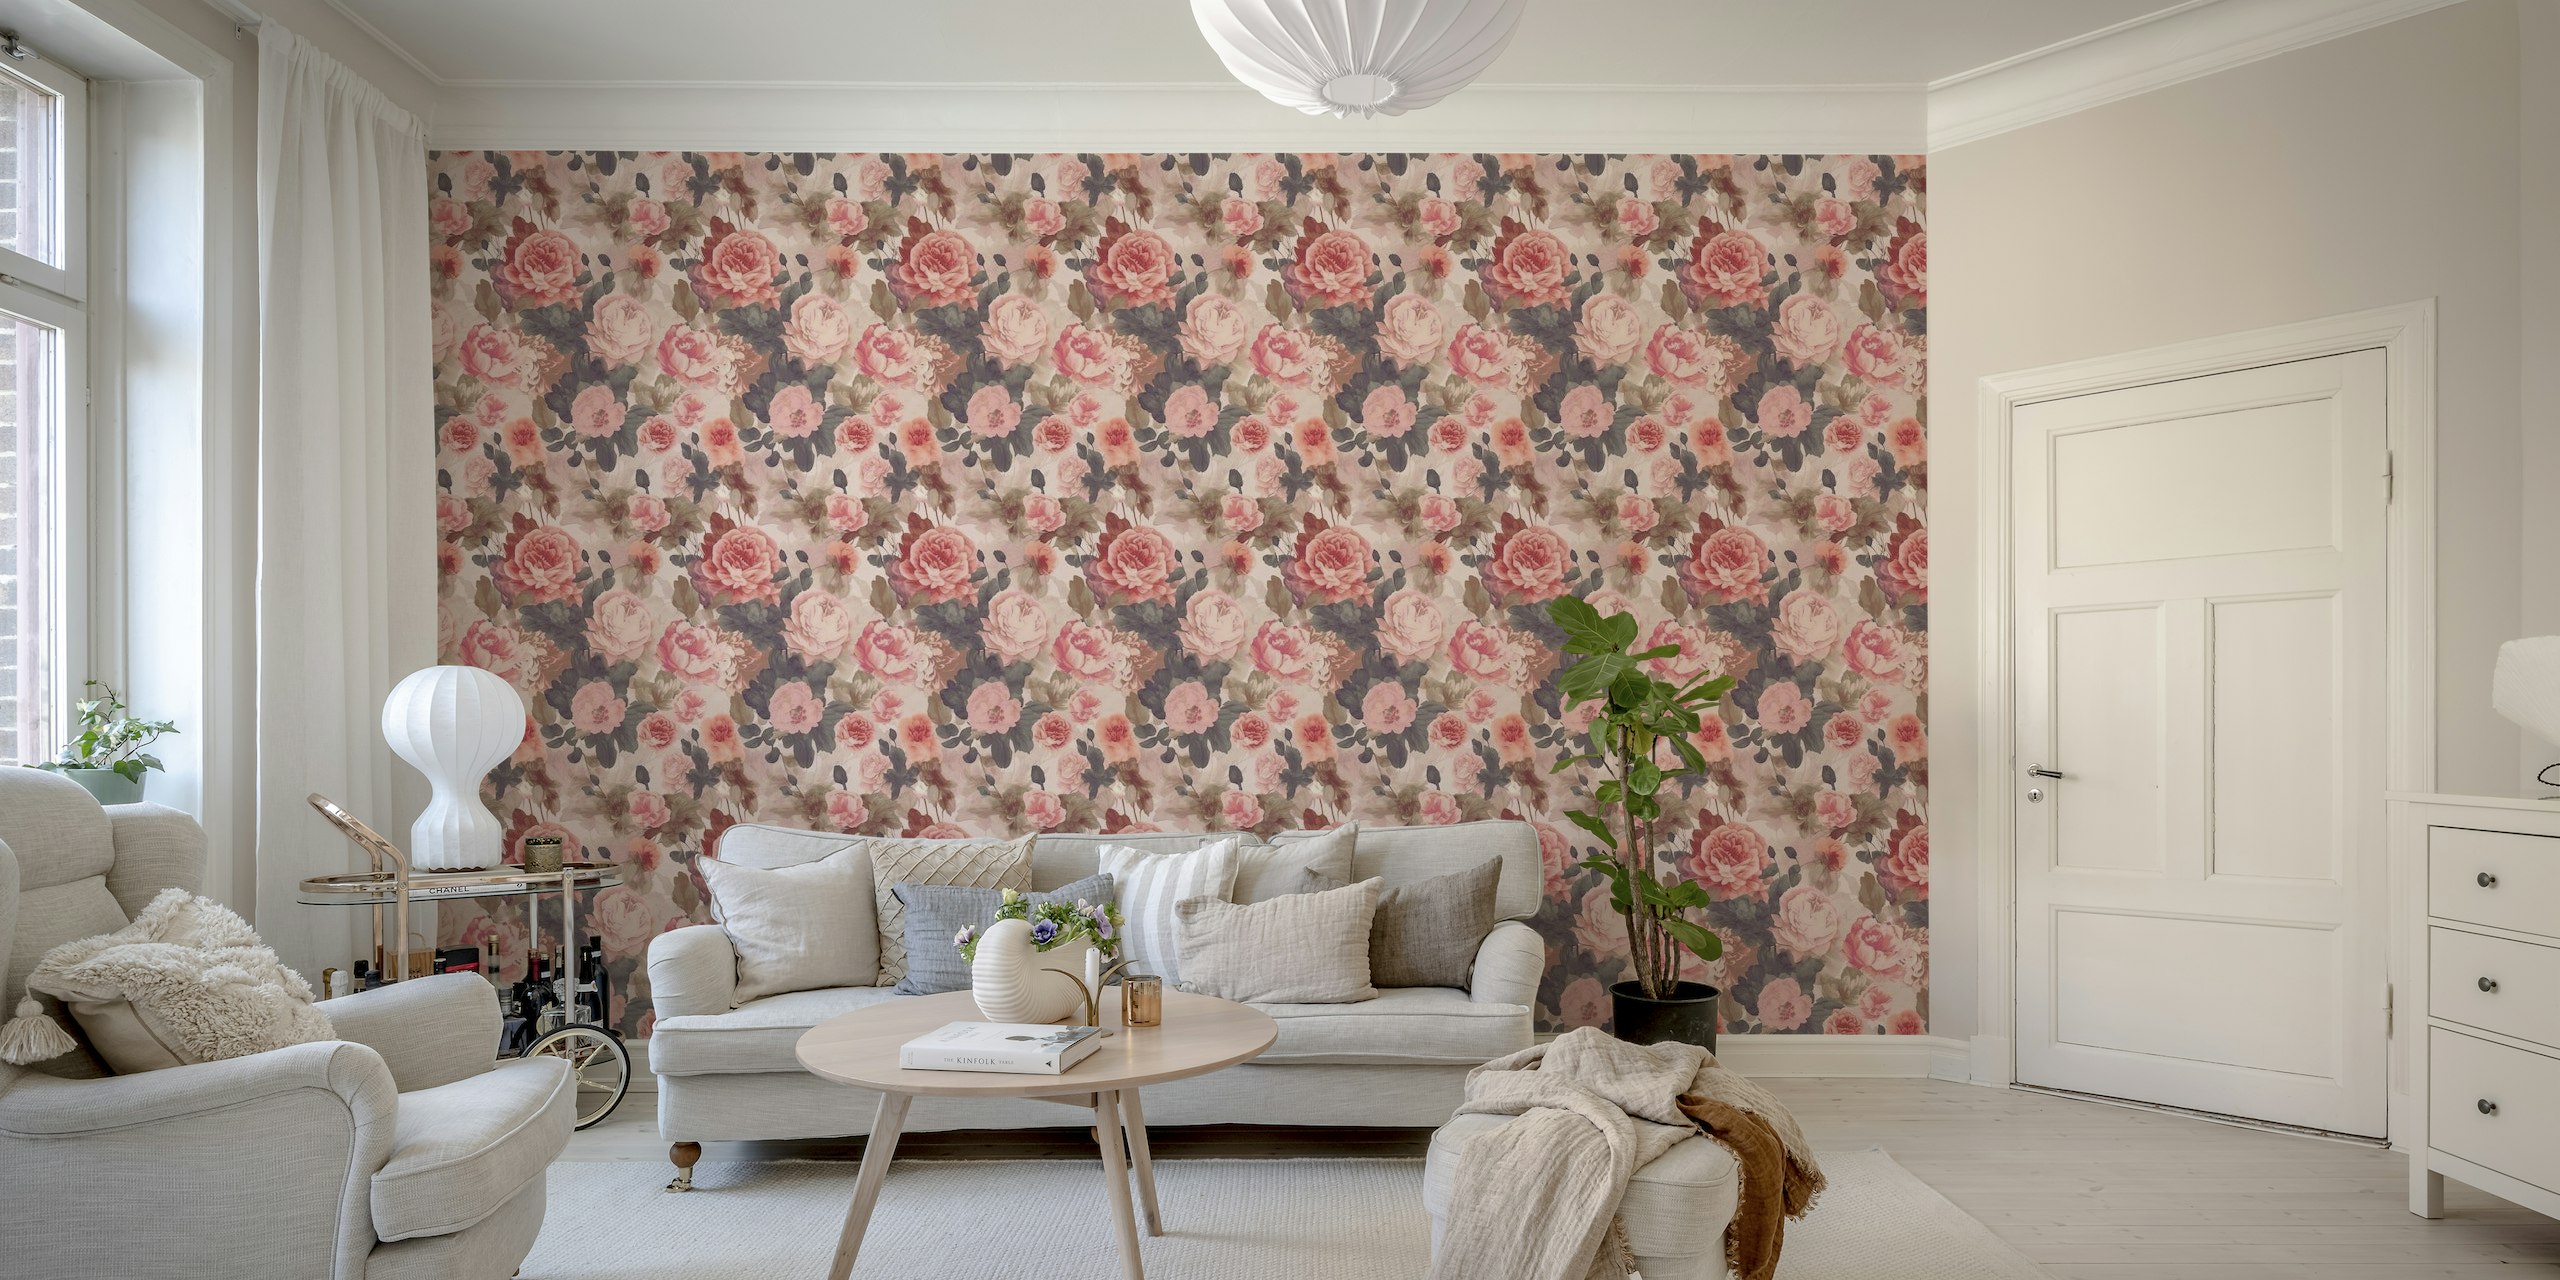 Baroque Roses Floral Nostalgia Design In Moody Pink Colors wallpaper